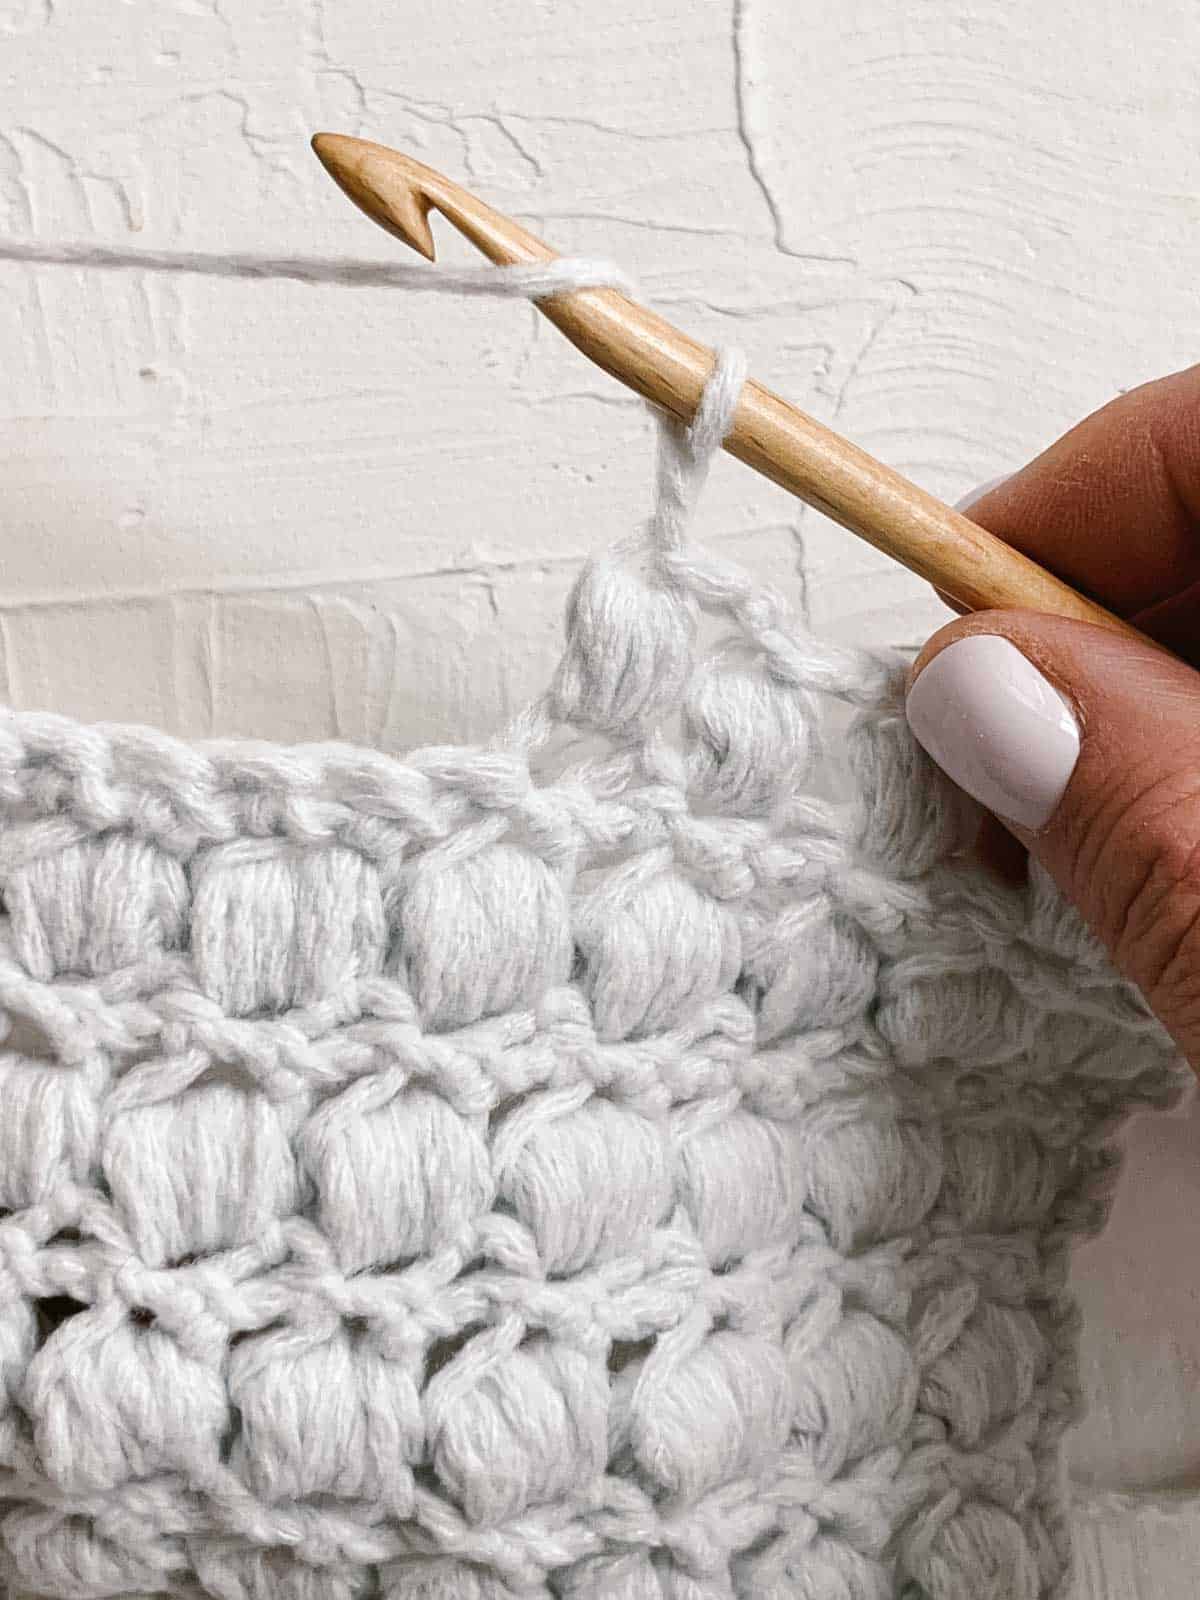 Yarn over with a wooden crochet hook in a swatch of puff stitches.